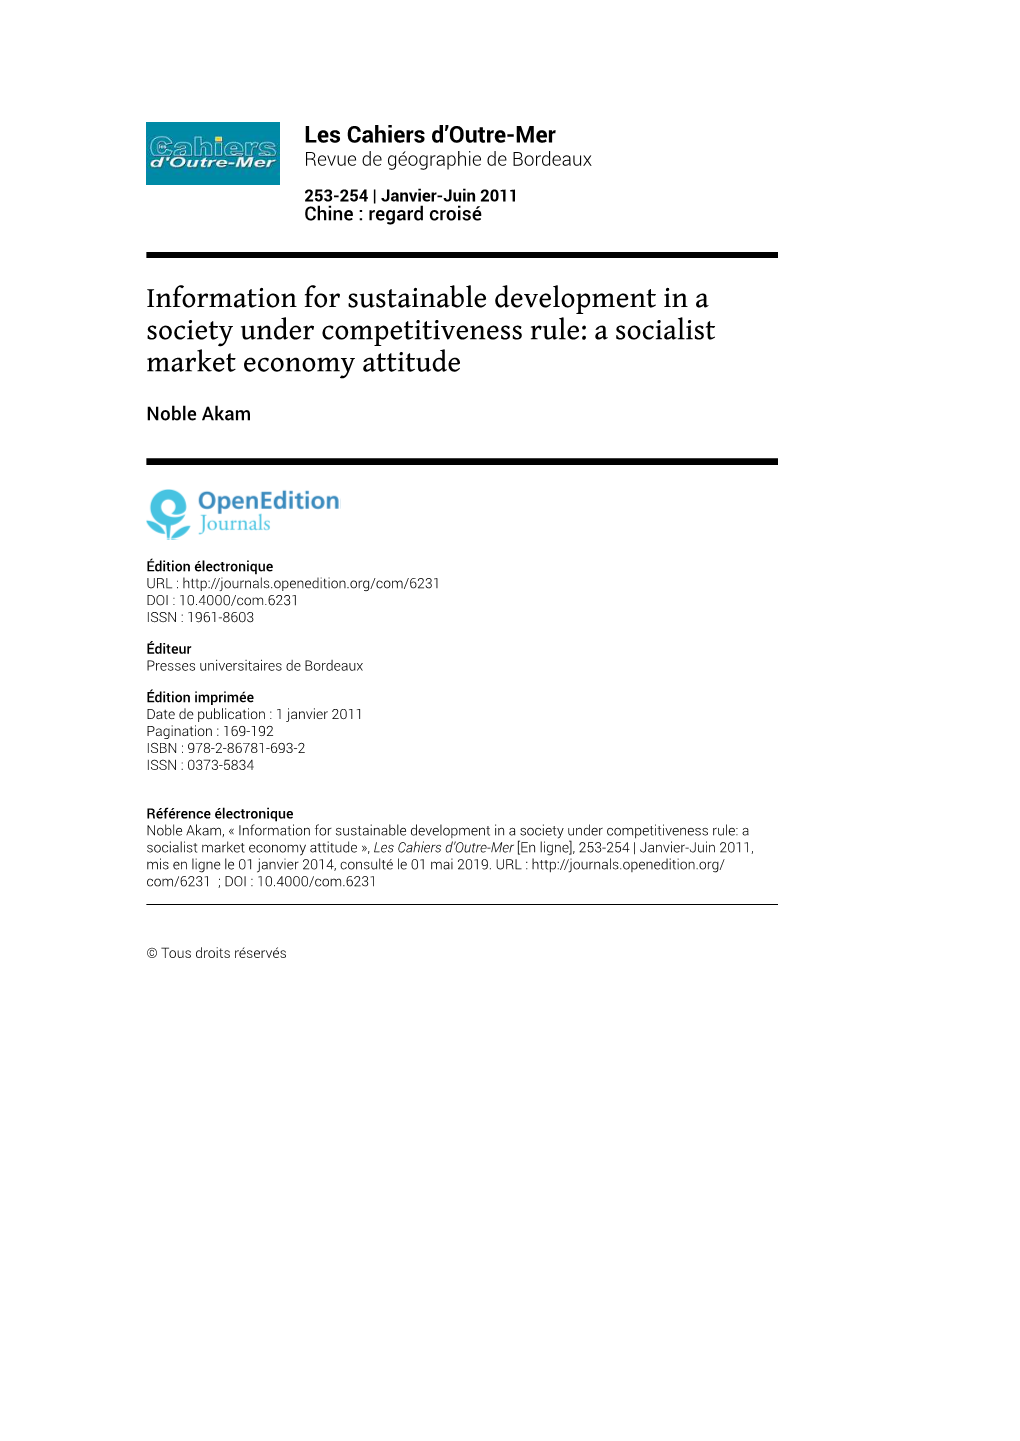 Information for Sustainable Development in a Society Under Competitiveness Rule: a Socialist Market Economy Attitude